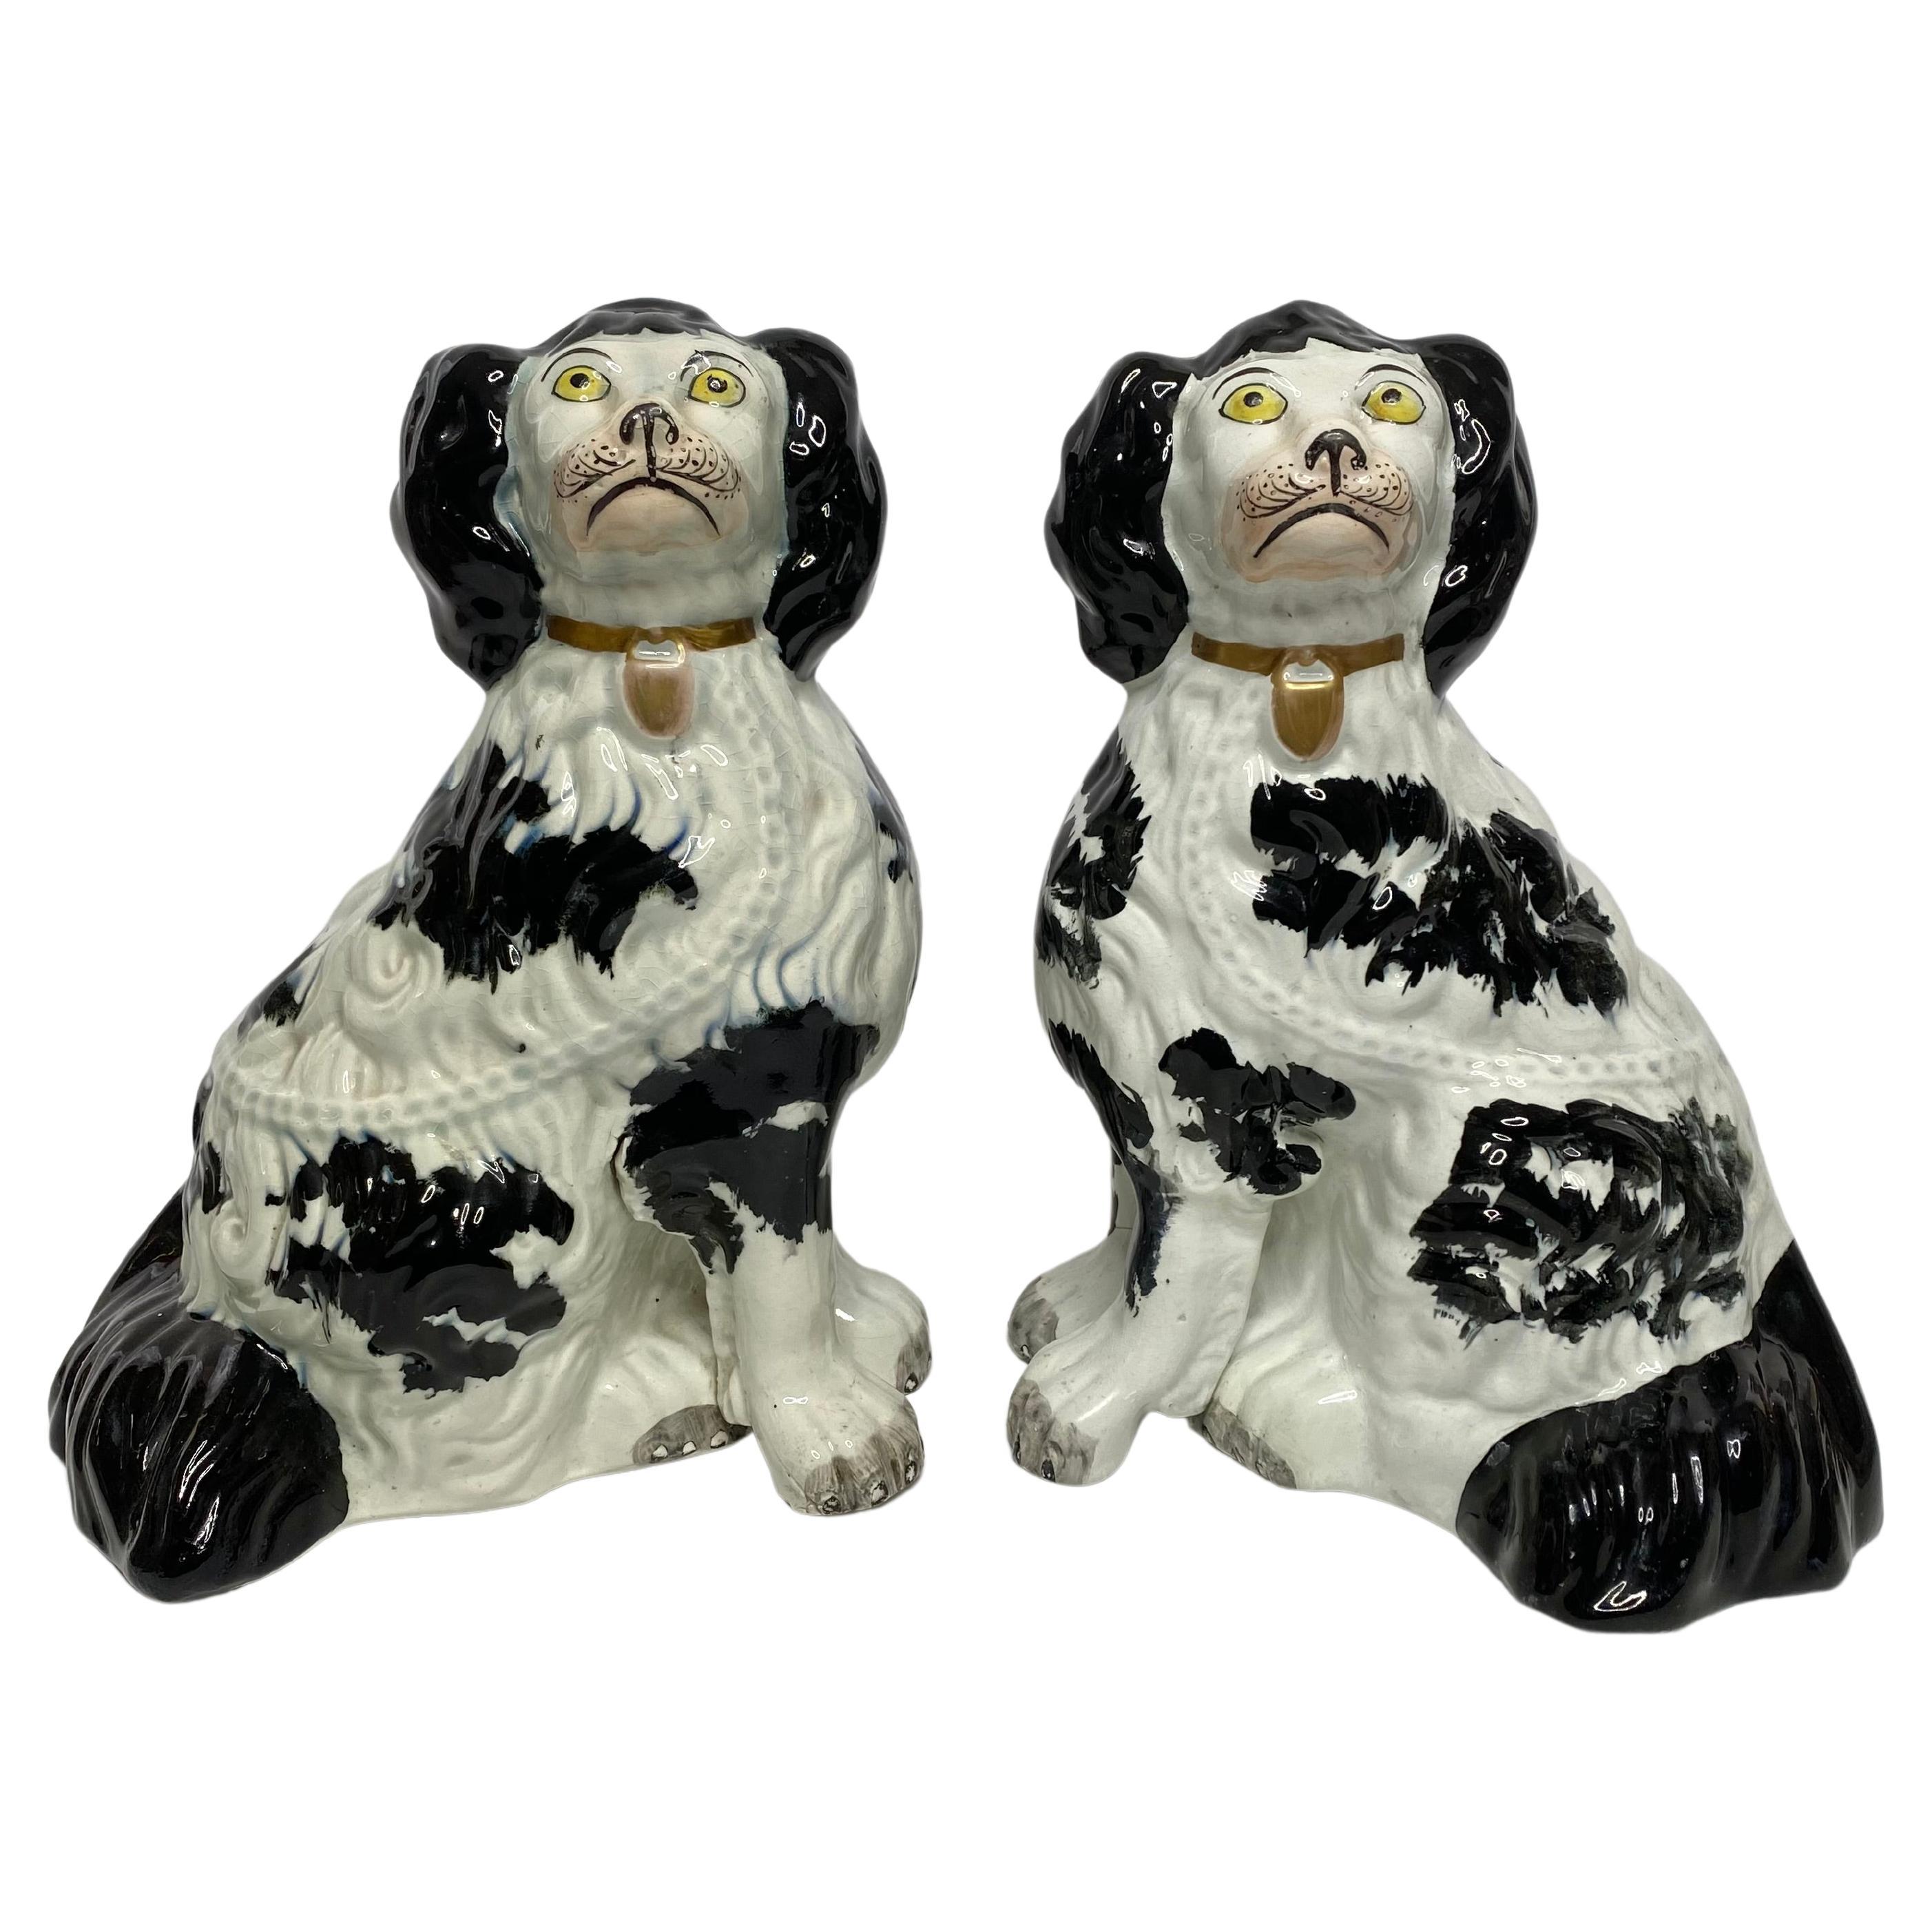 Pair of large and rare Staffordshire Spaniels, c. 1840.